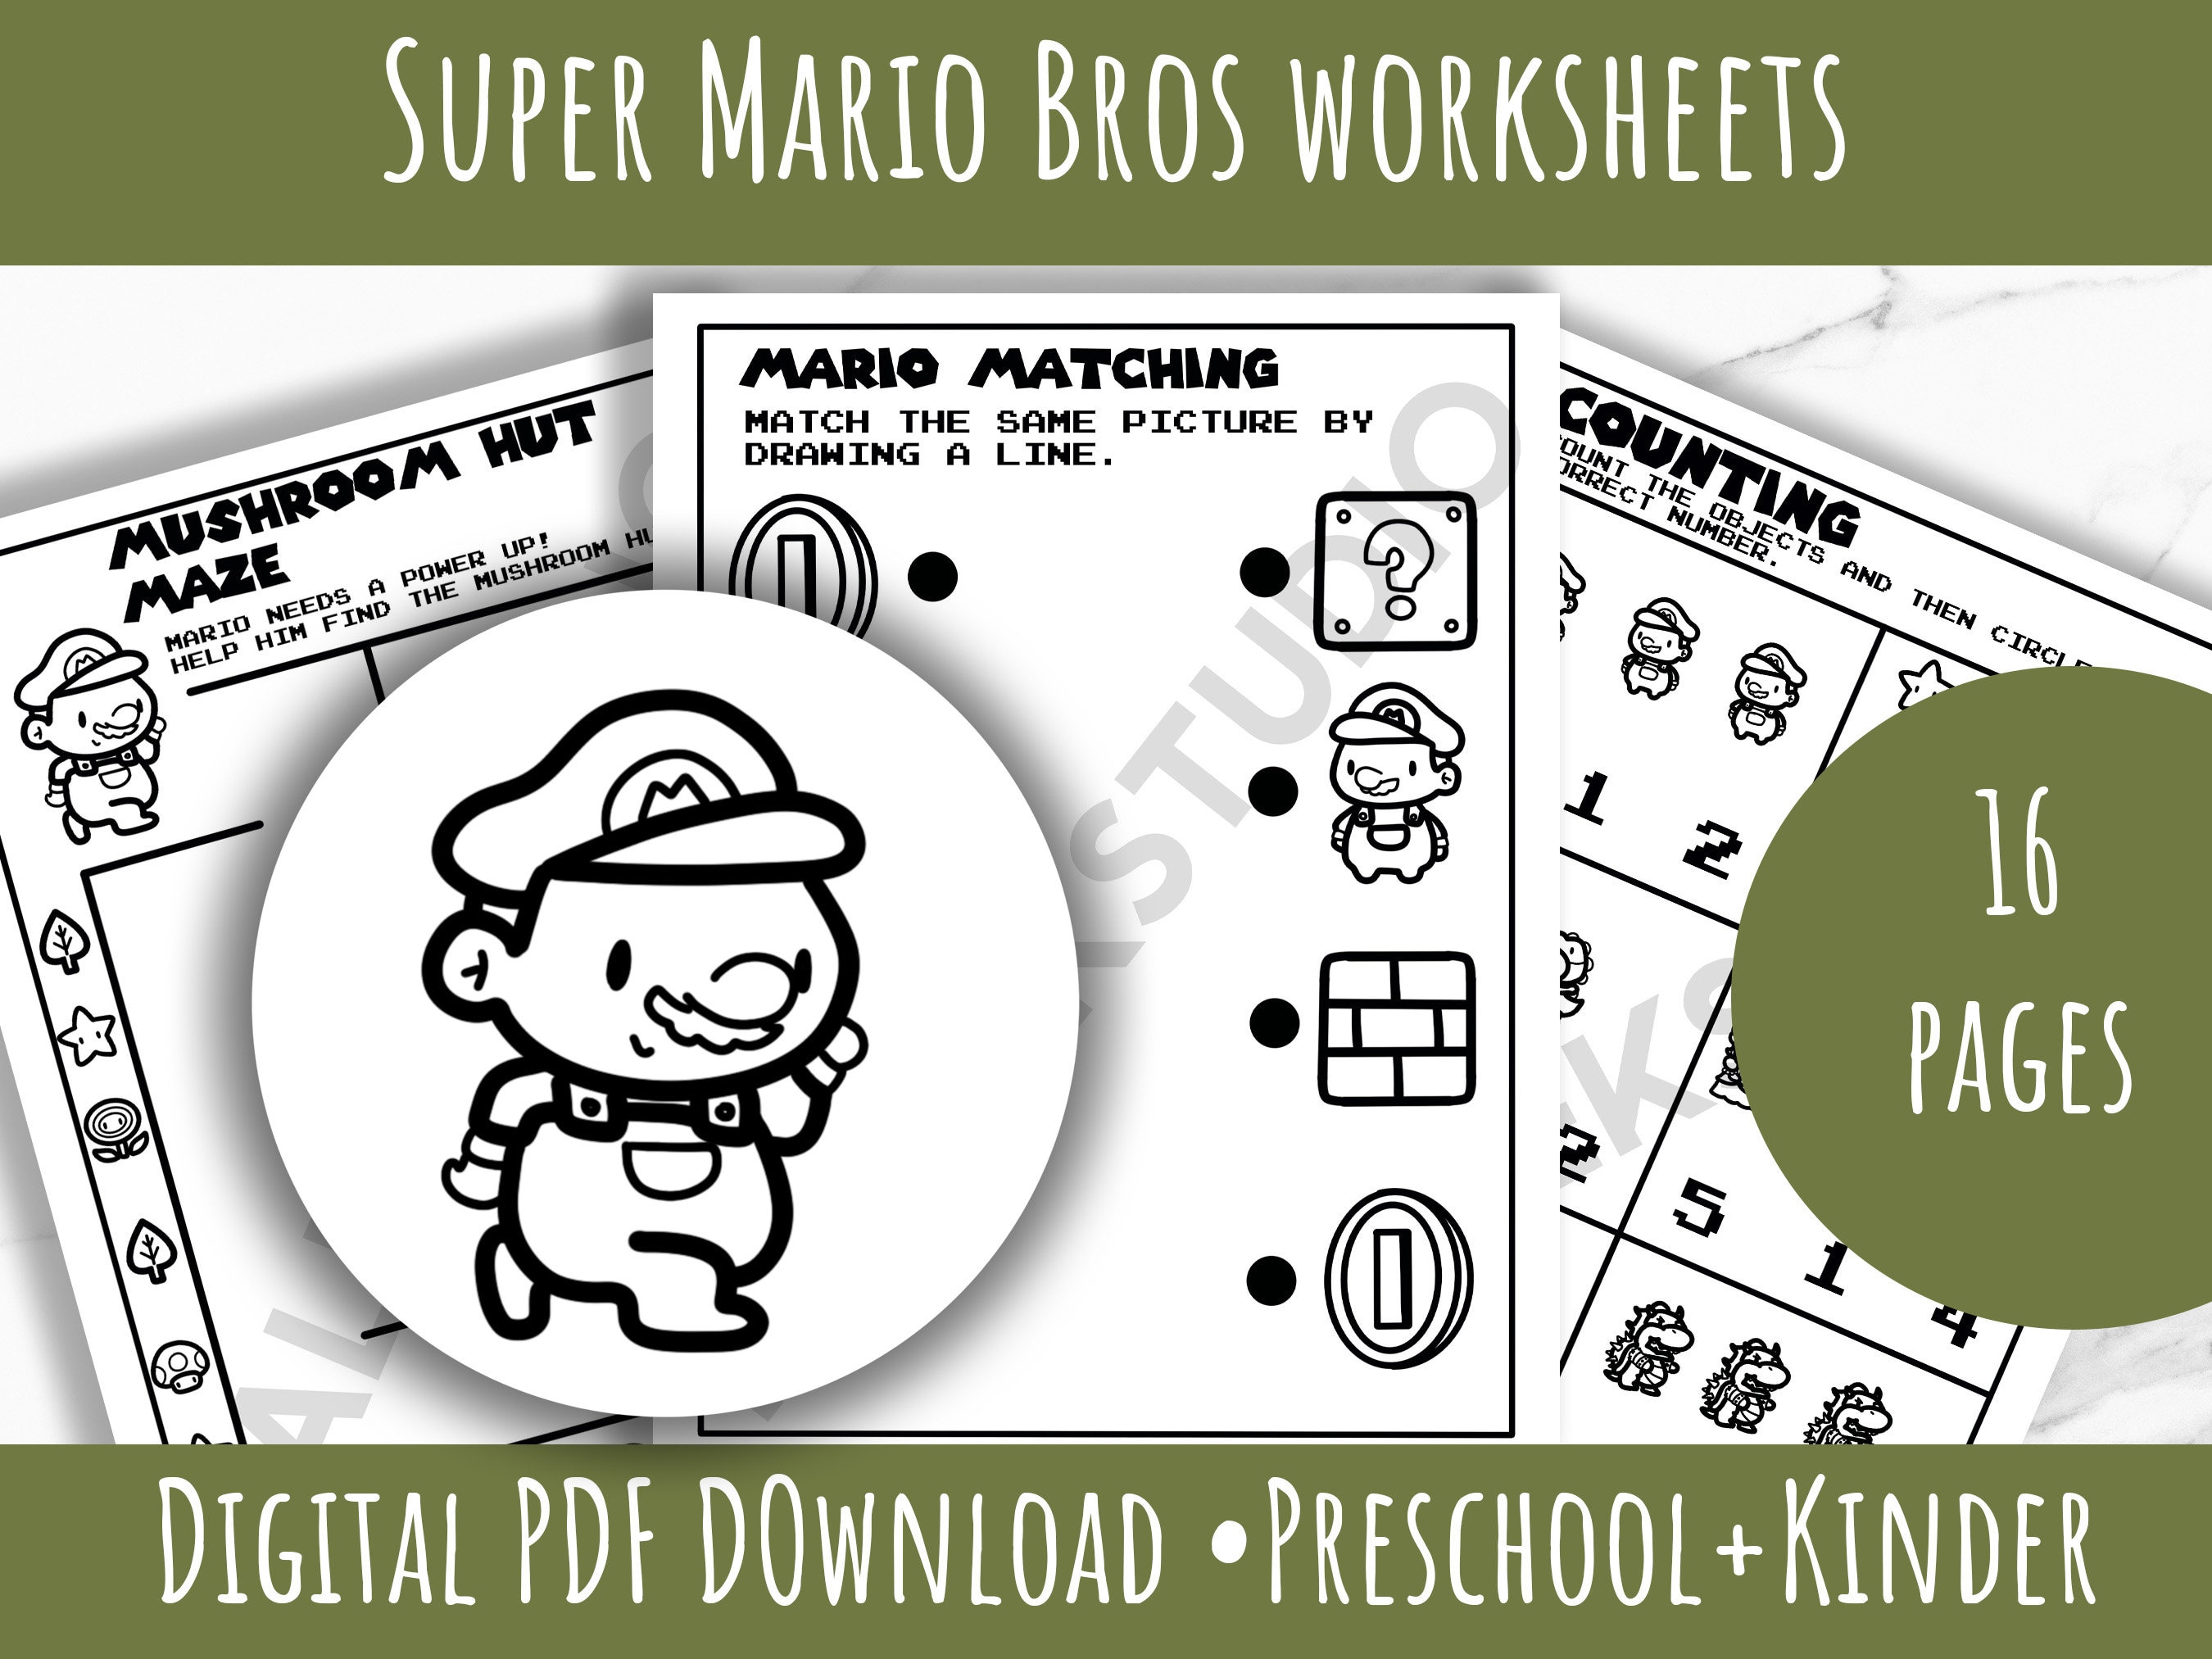 Free Mario Math Games, Activities, & Worksheets for Kids